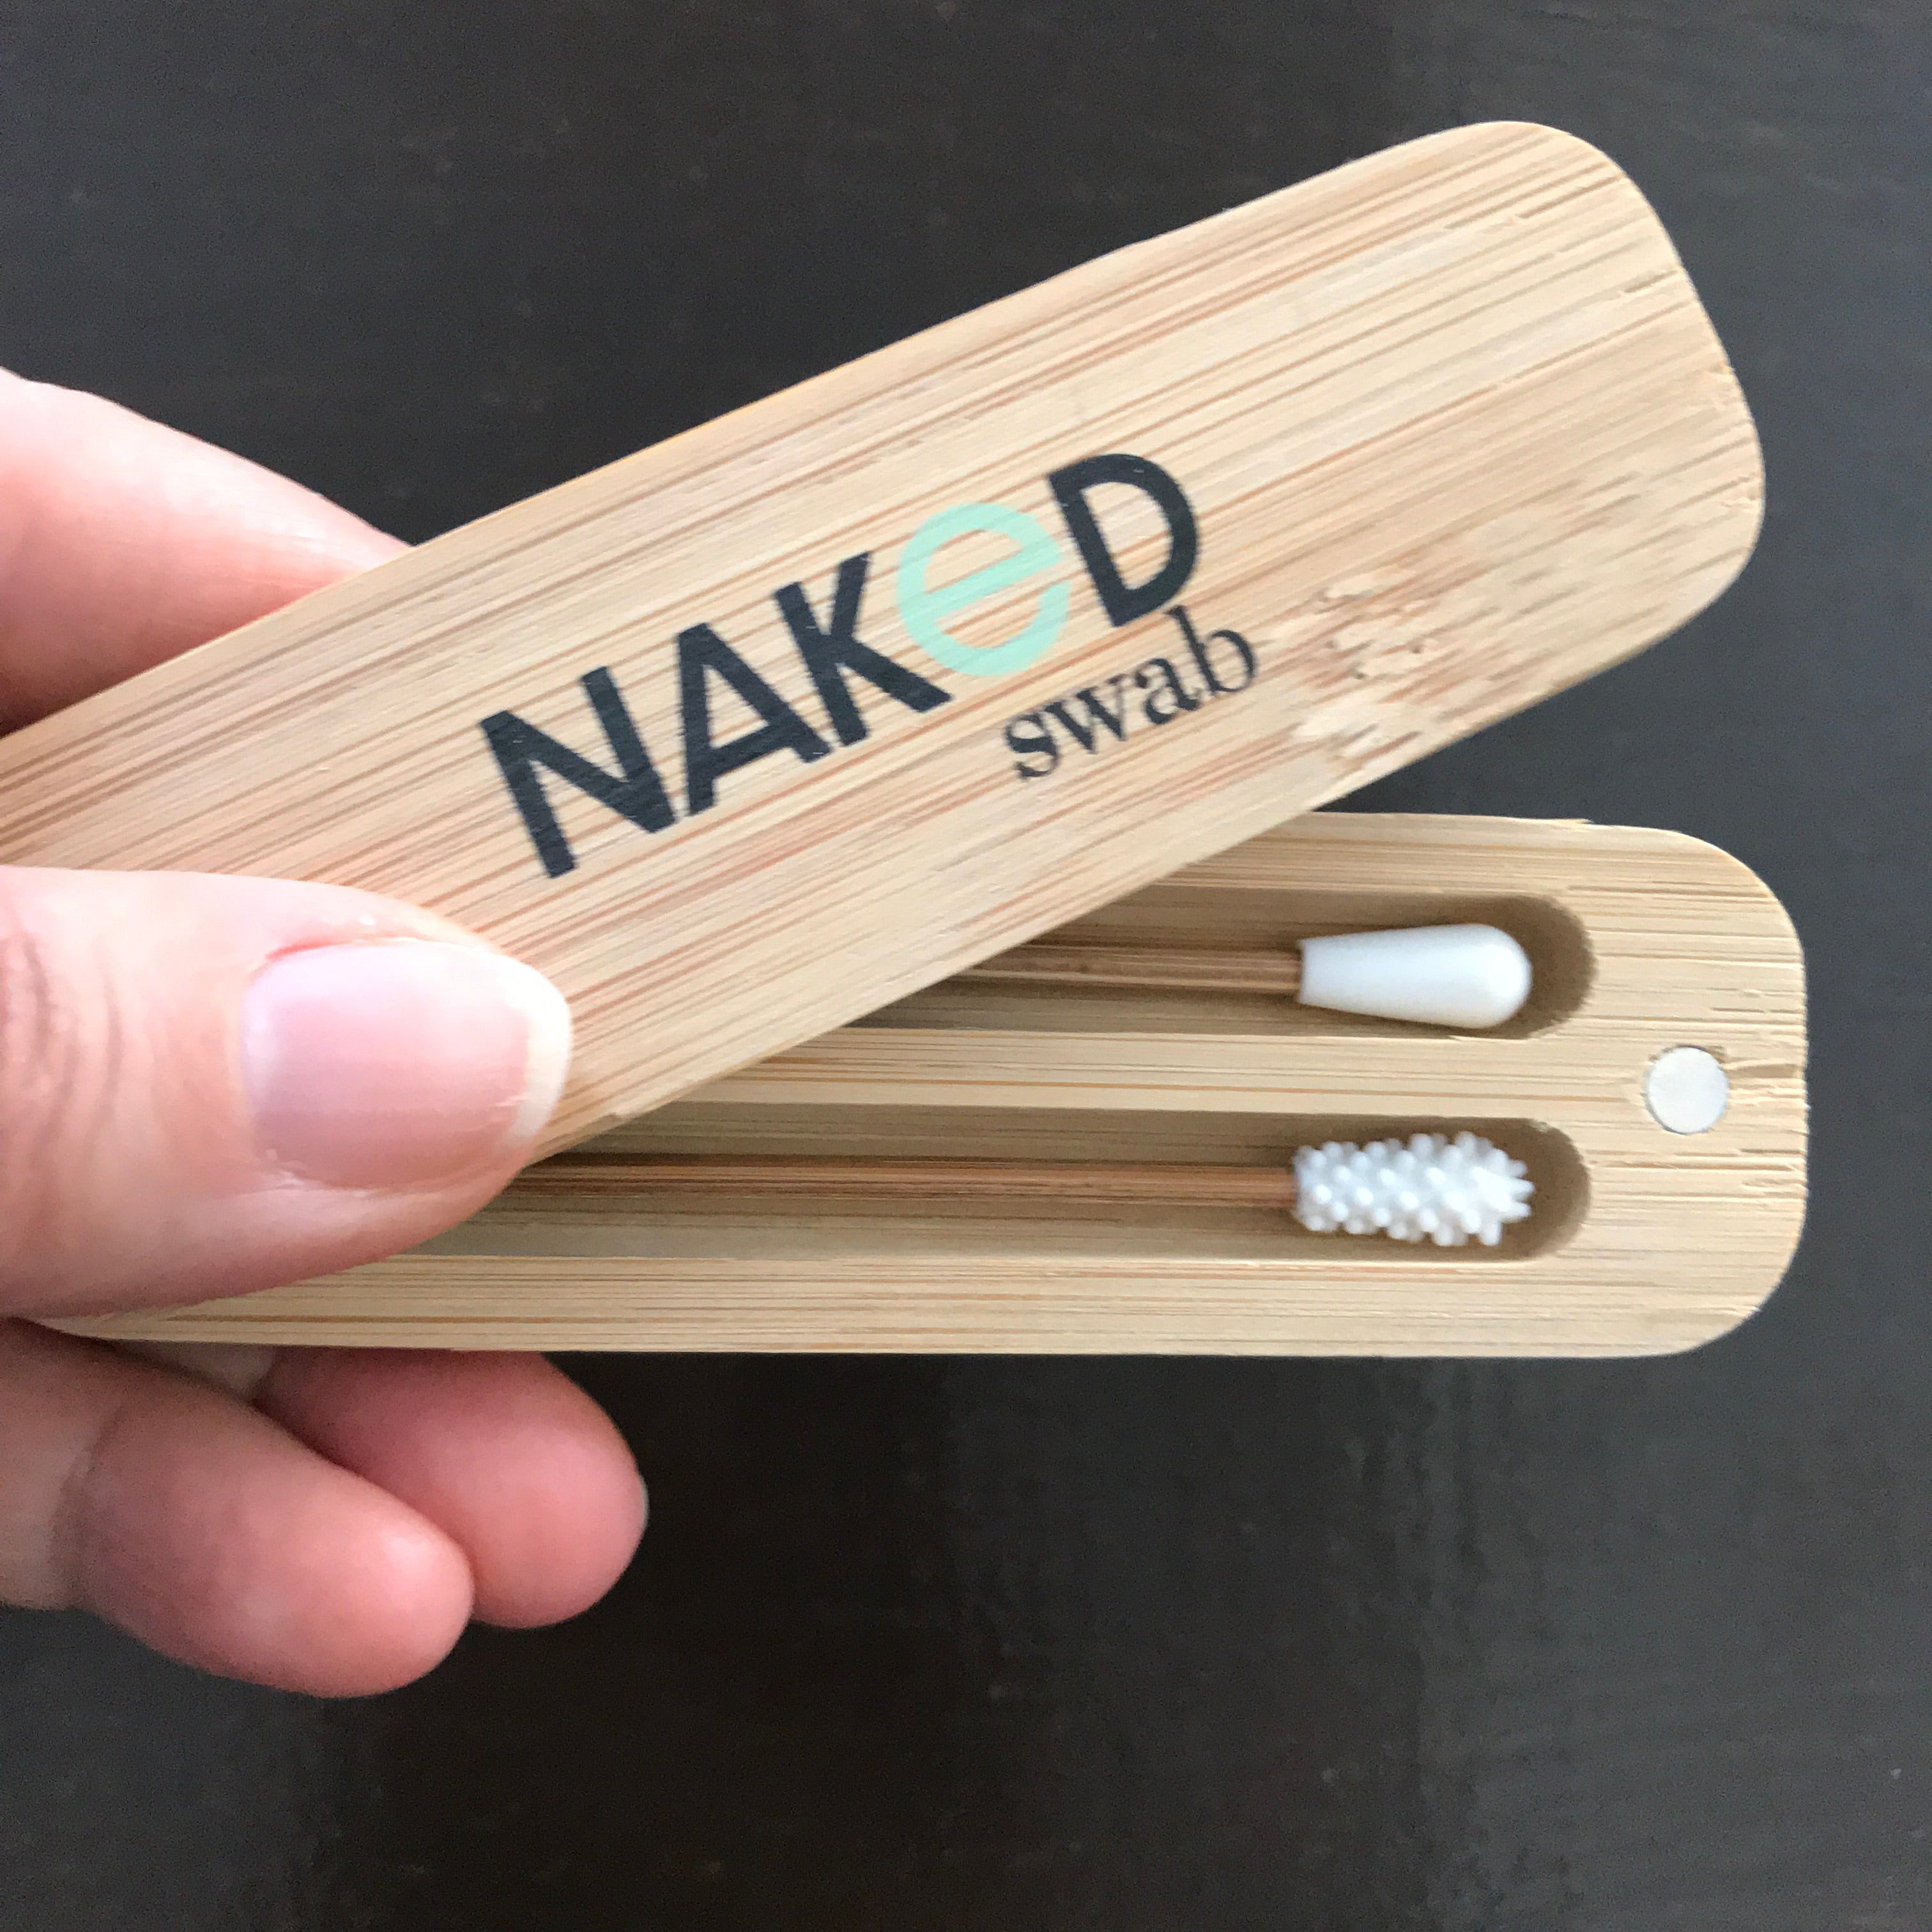 2 piece naked swab reusable swabs in bamboo case for use up to 2,000 times